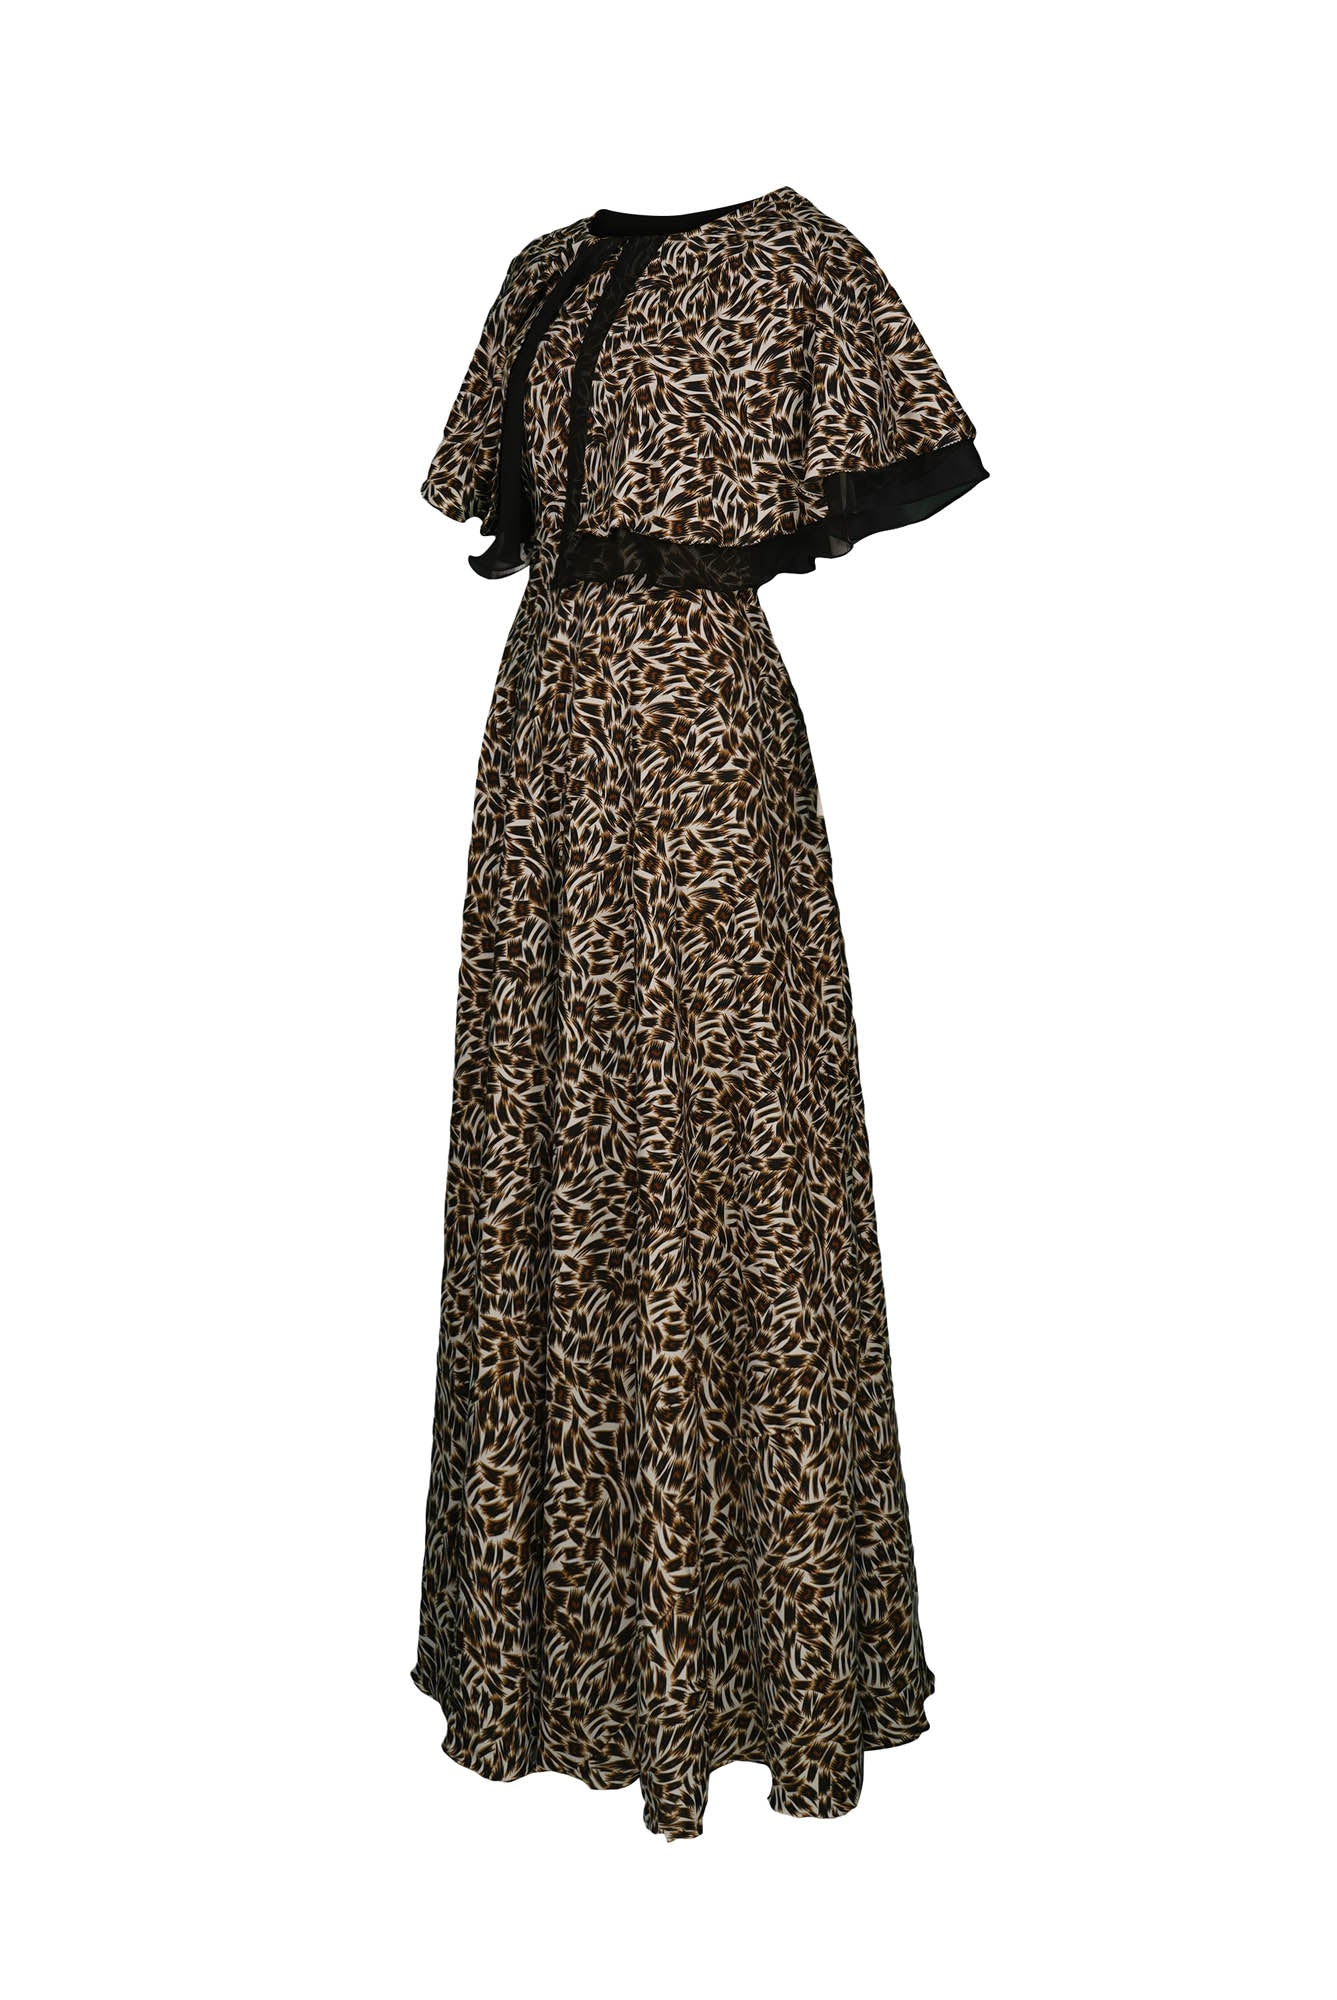 ZIA024 Animal Printed Flared Gown with Black Flares